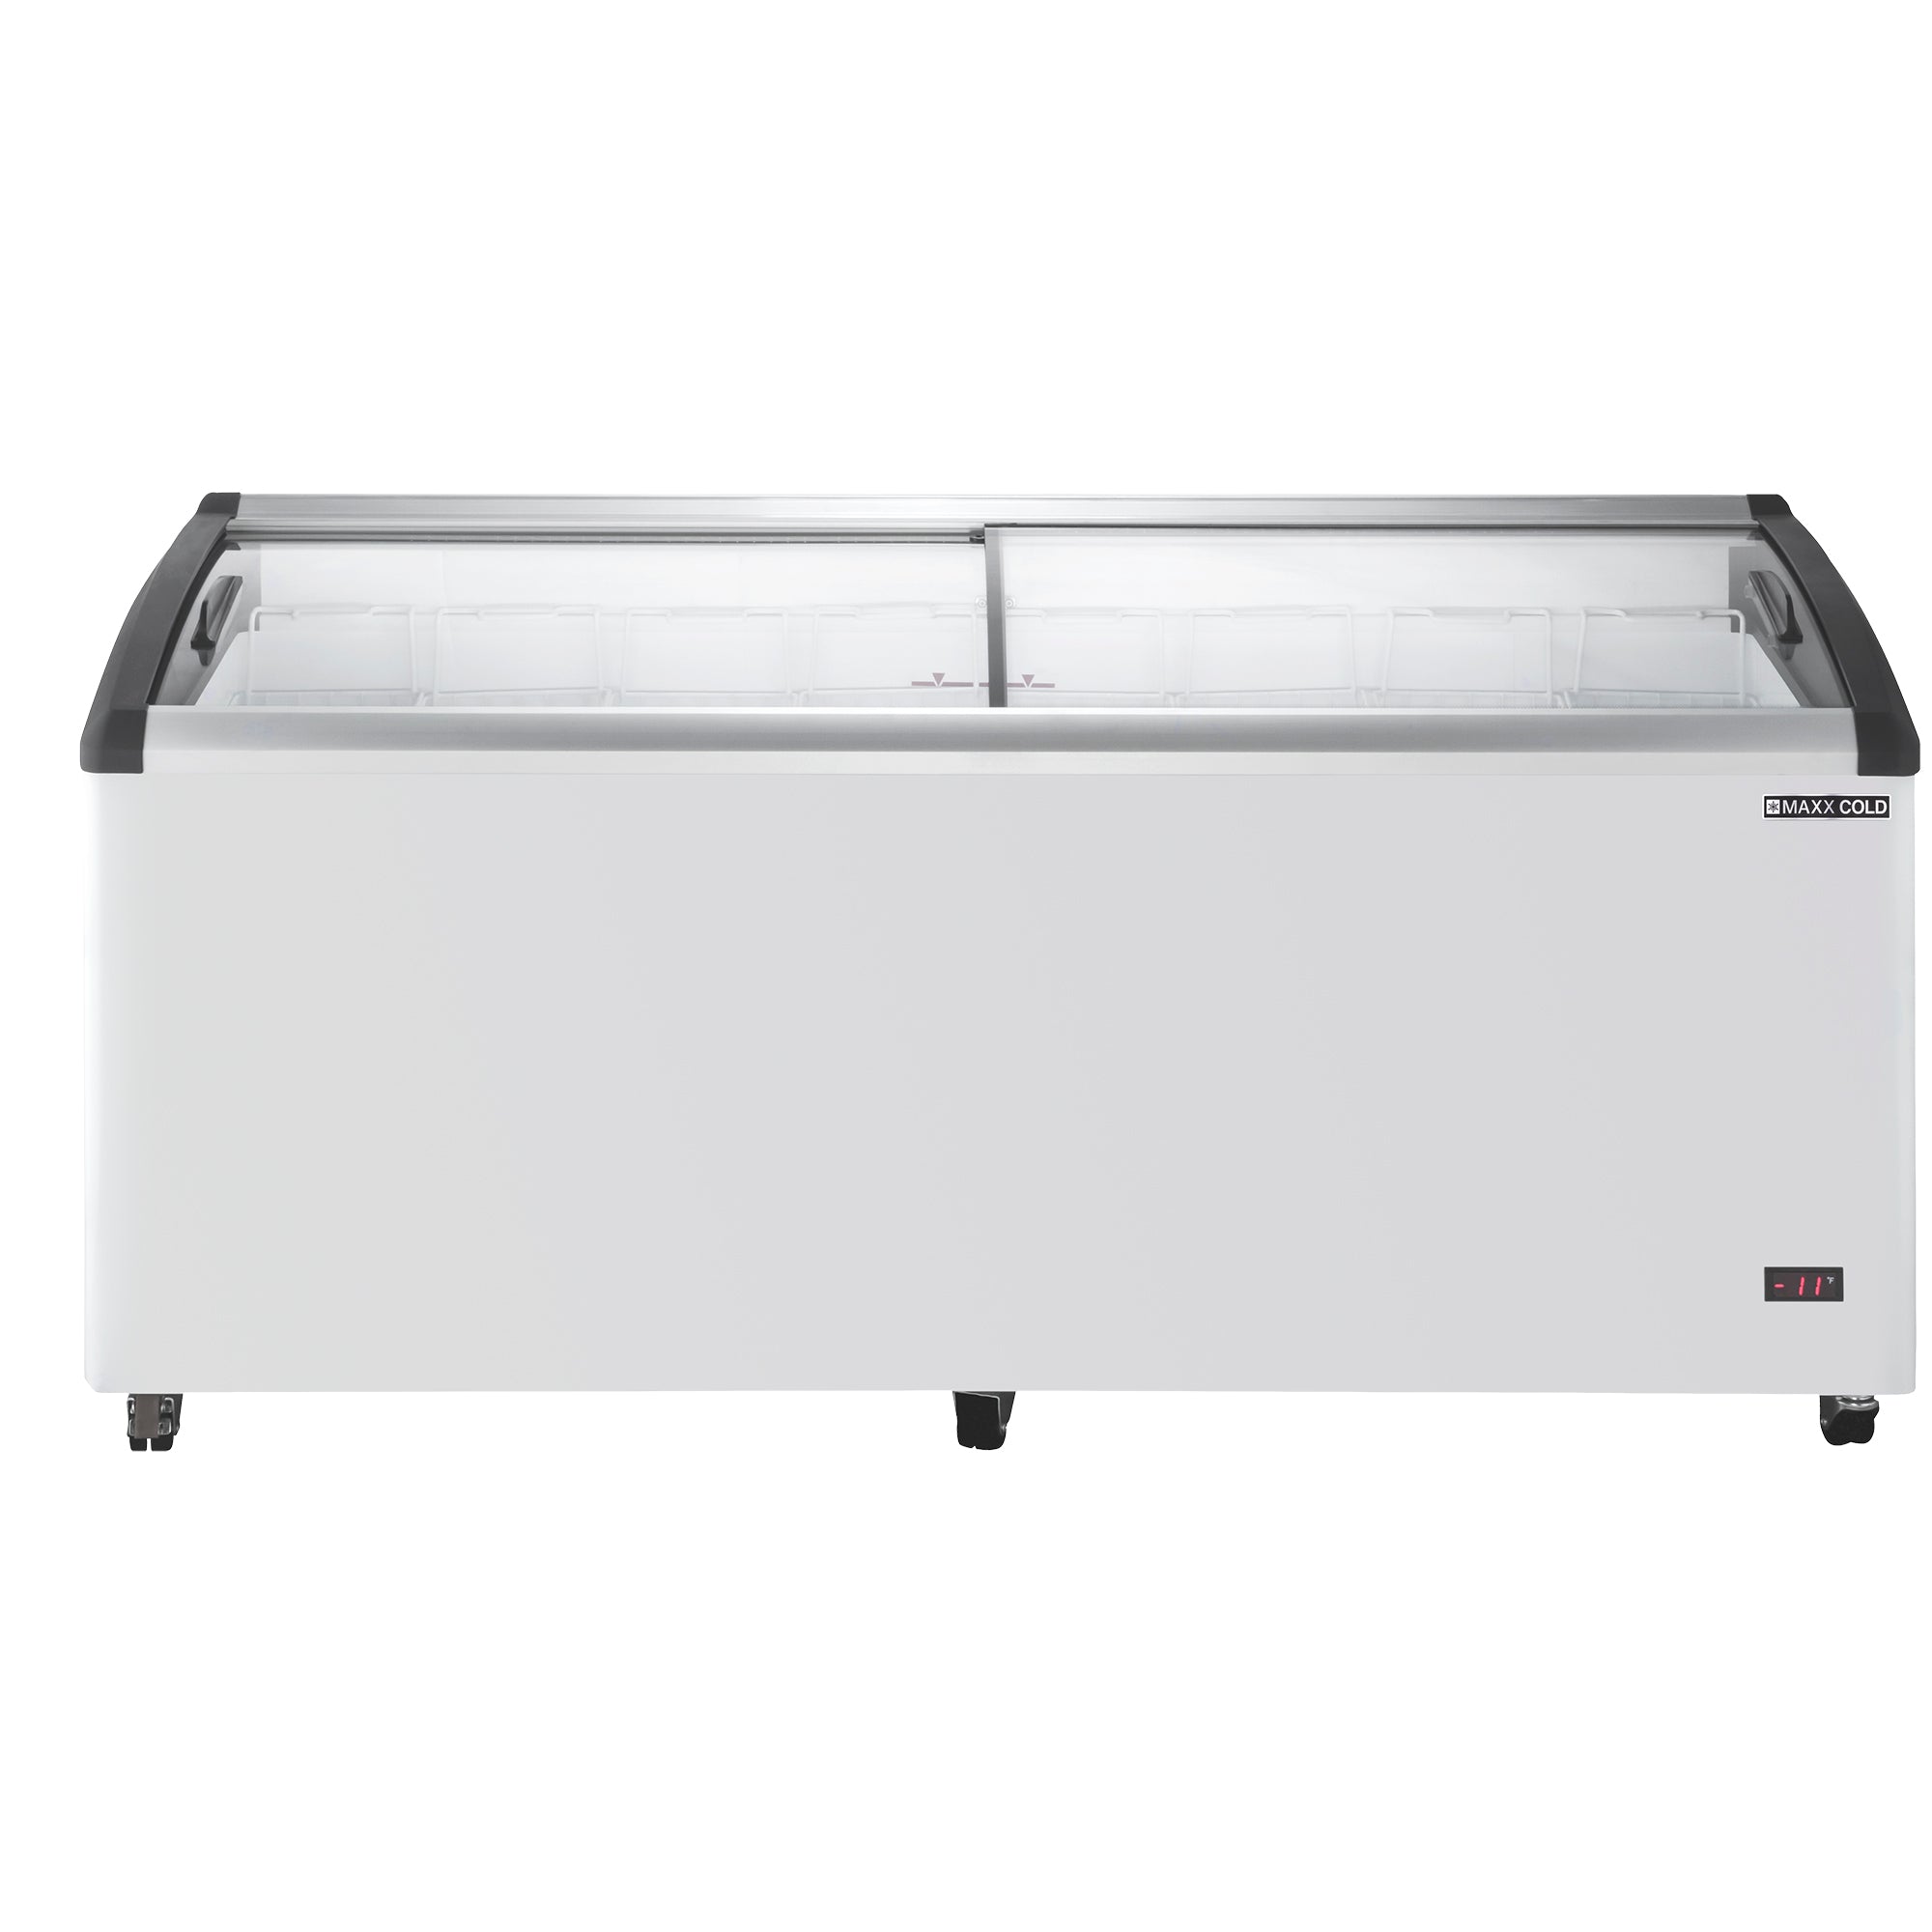 Maxx Cold - MXF72CHC-8, Maxx Cold Curved Glass Top Chest Freezer Display, 71.7"W, 14.30 cu. ft. Storage Capacity, Equipped with (8) Wire Baskets, in White